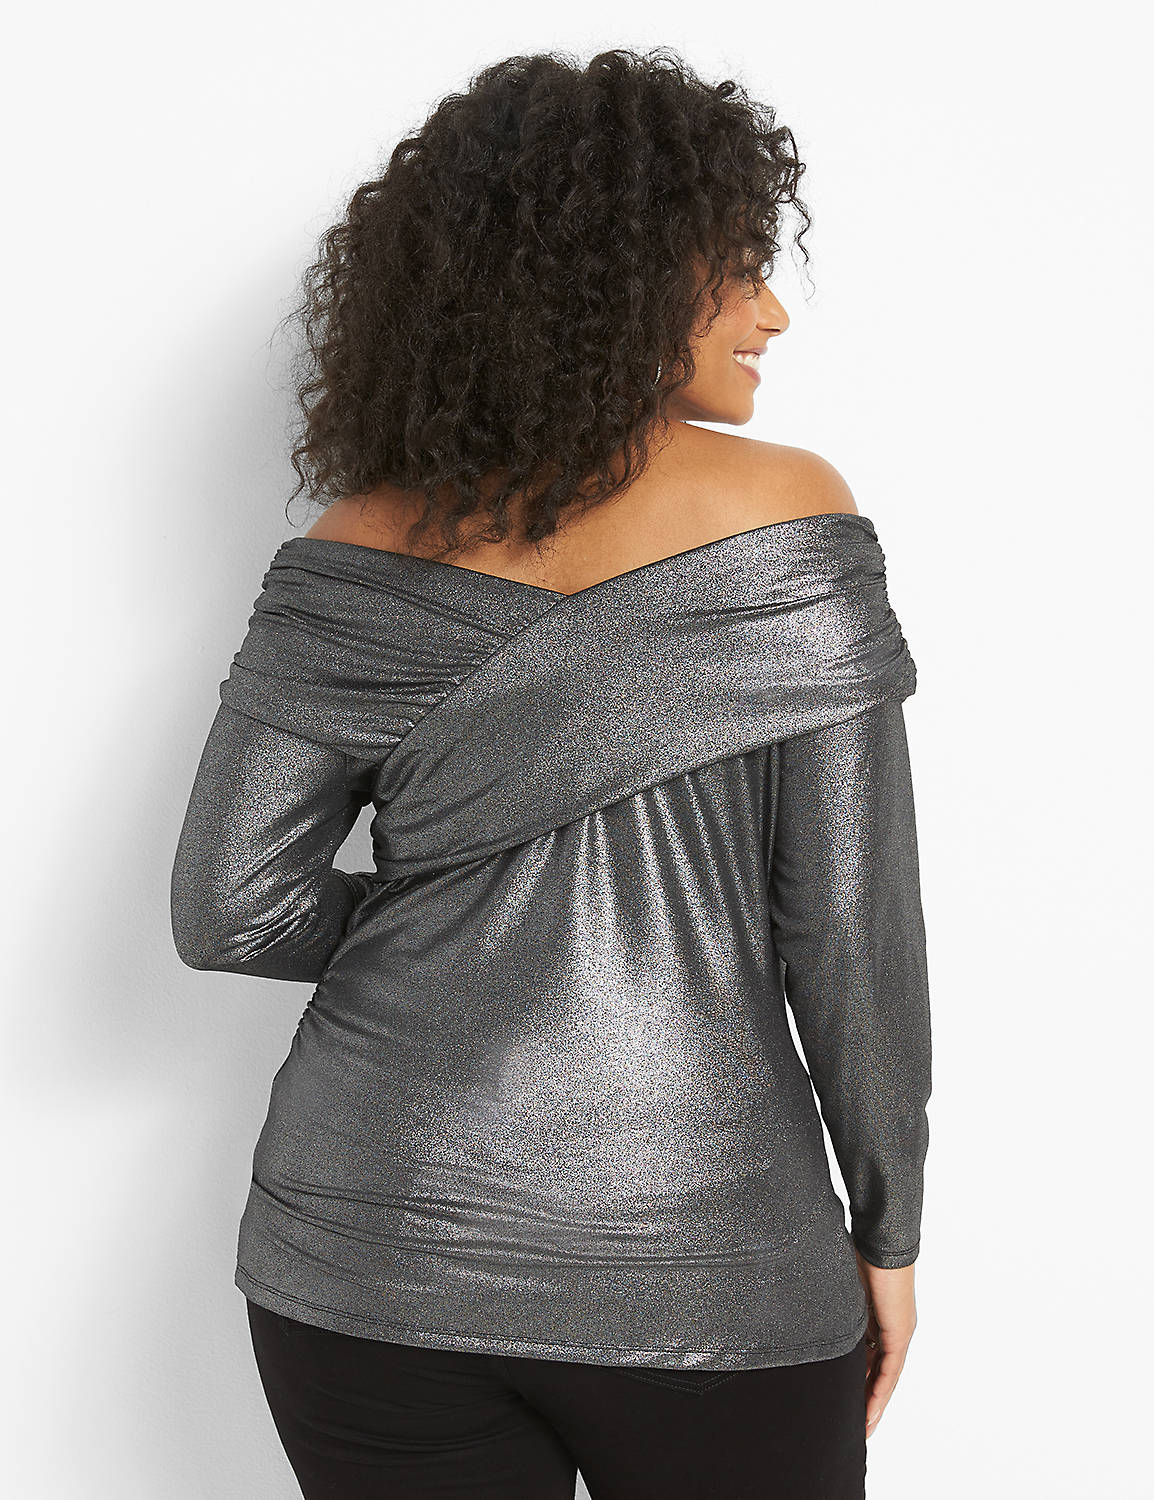 Long Sleeve Off The Shoulder Illusion In Metallic Knit Top 1124646:Metallic Grey:22/24 Product Image 2